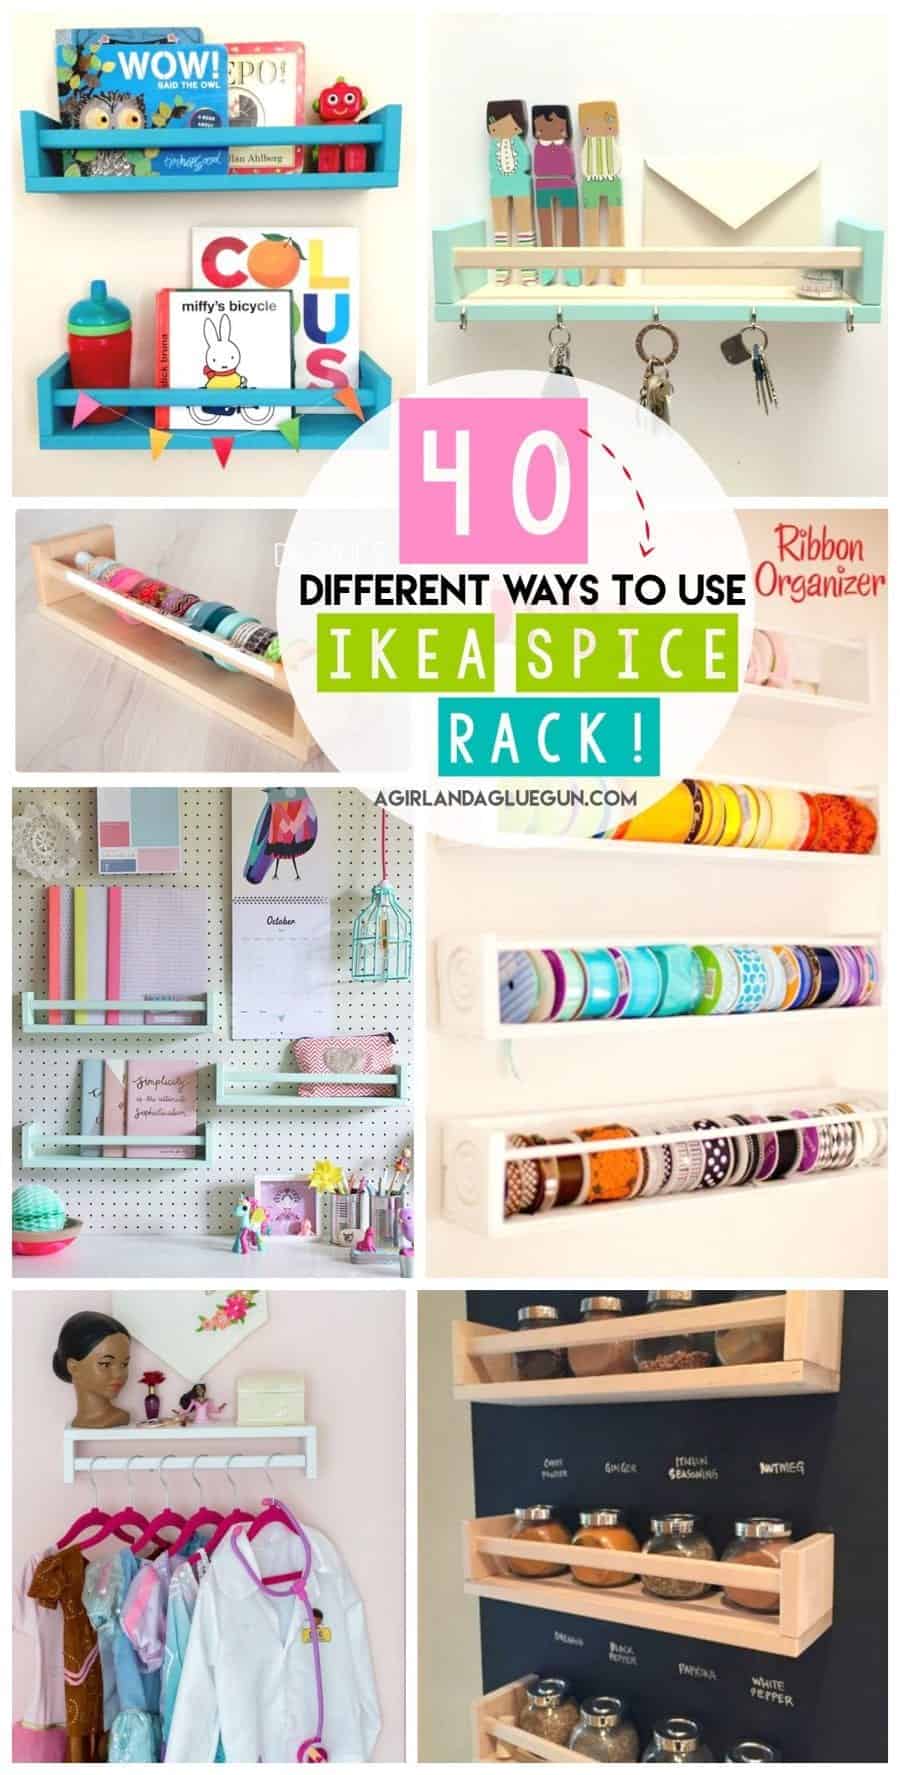 40 Ways To Organize With An Ikea Spice Rack A Girl And A Glue Gun,Trader Joes Dehydrated Strawberries